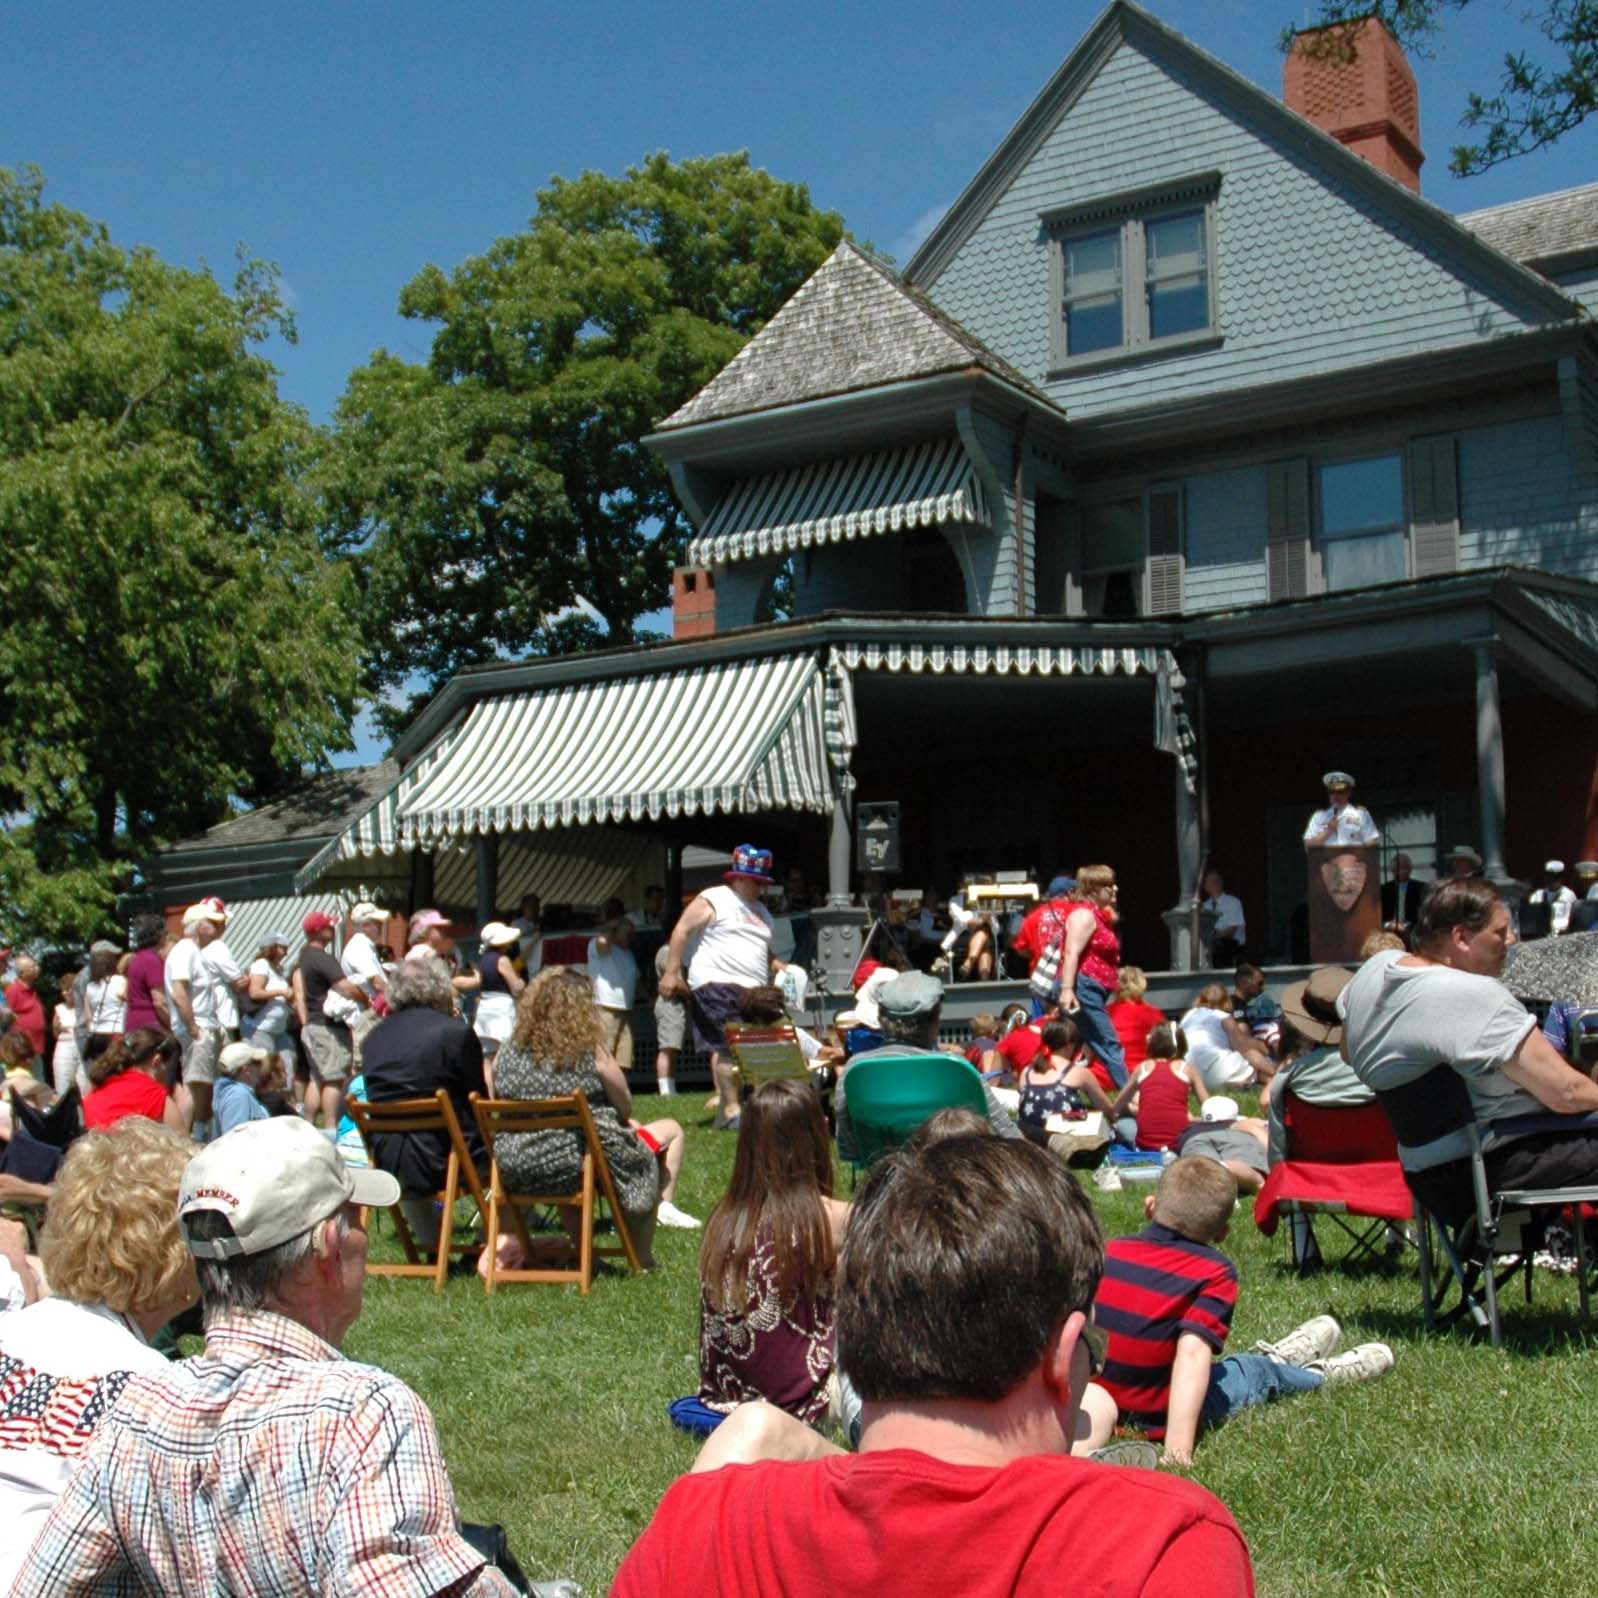 Visitors gathered on the lawn near the Roosevelt Home on July 4, 2009.